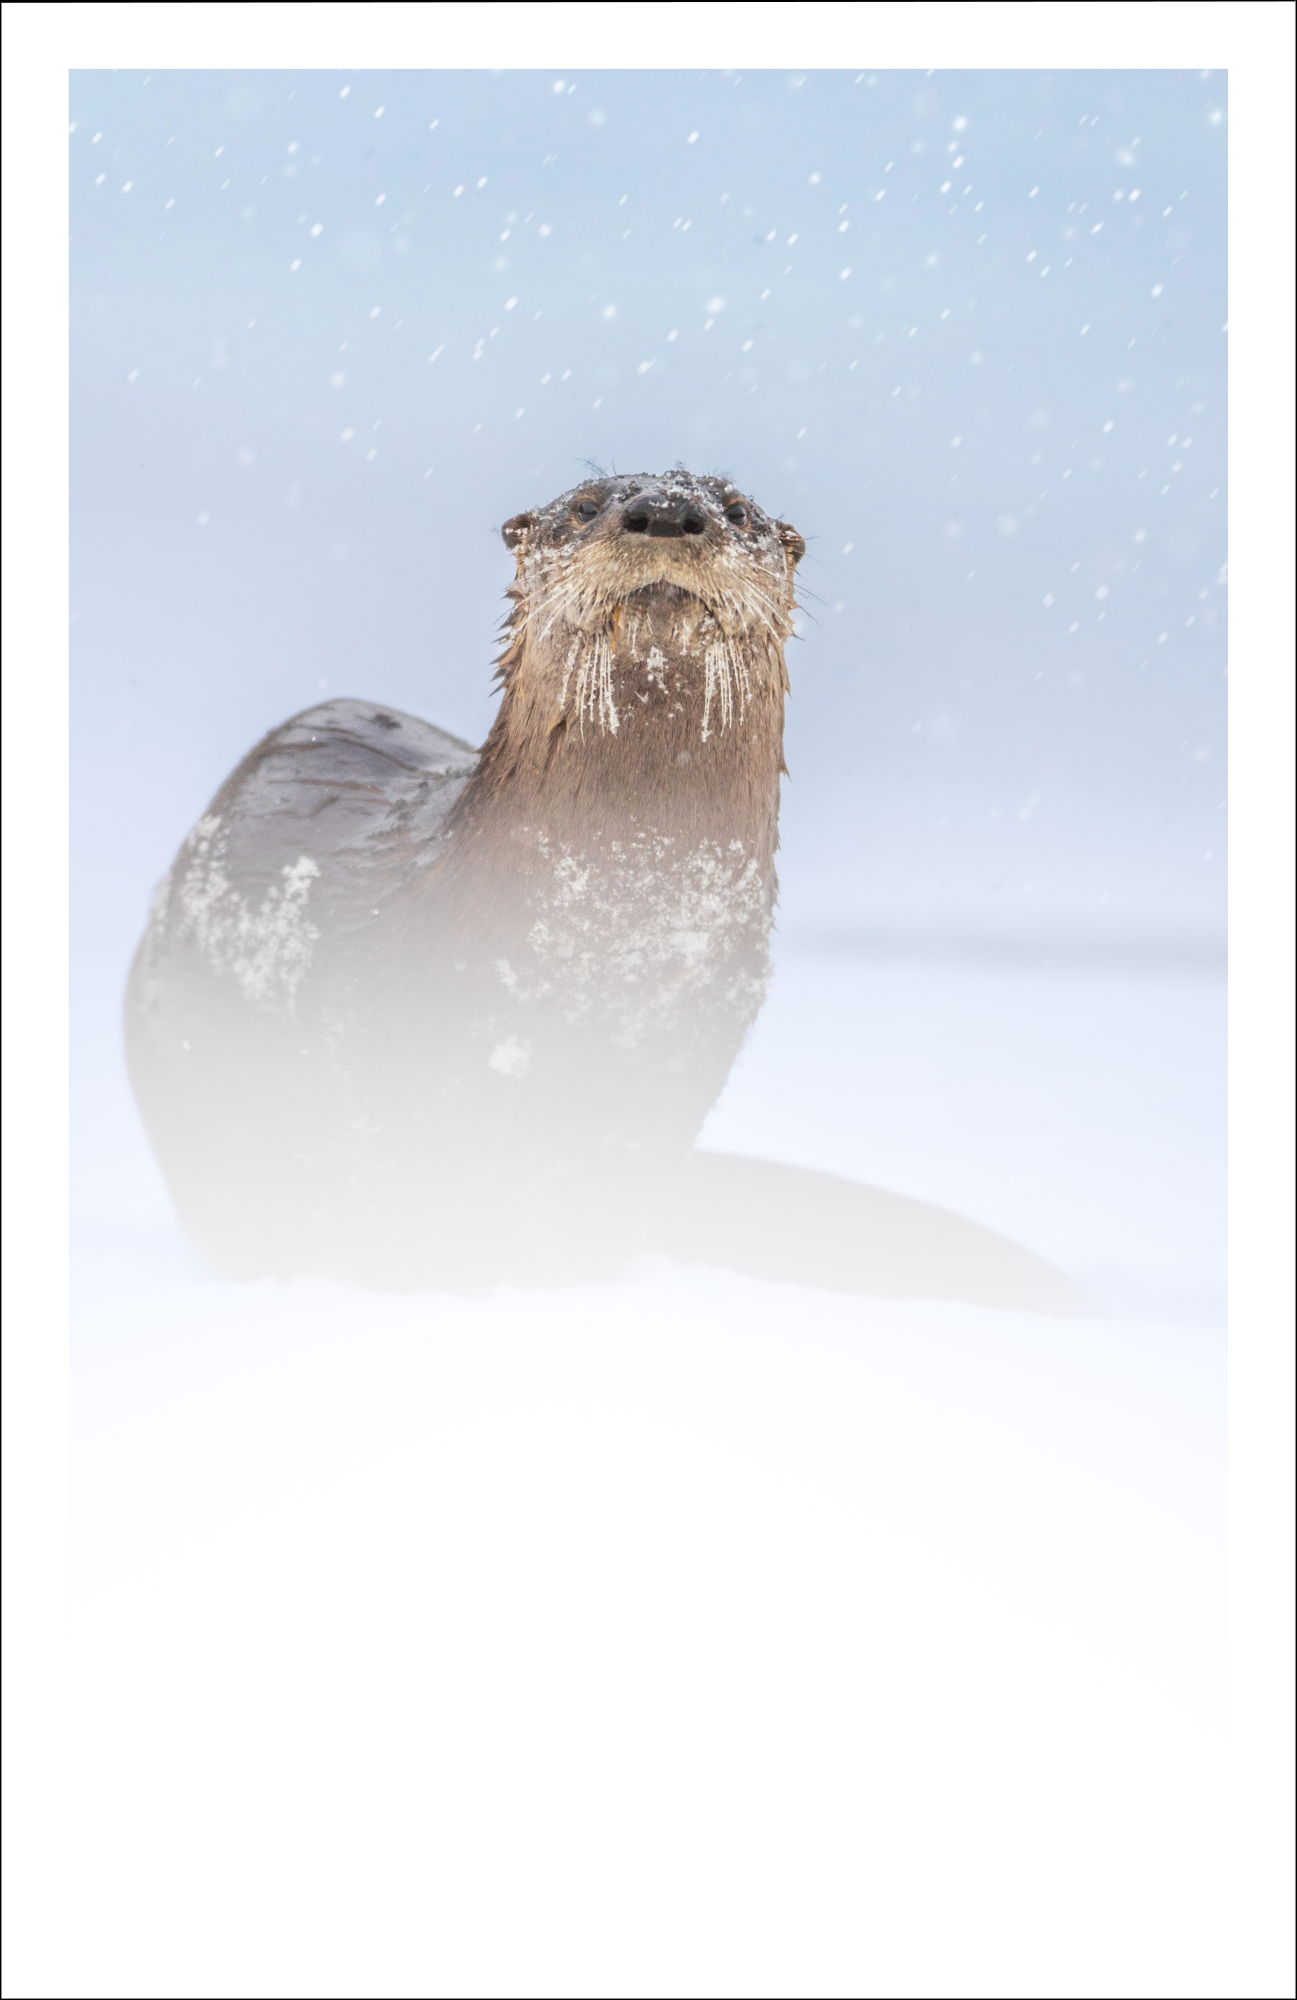 Otter under the snow - Greeting Card